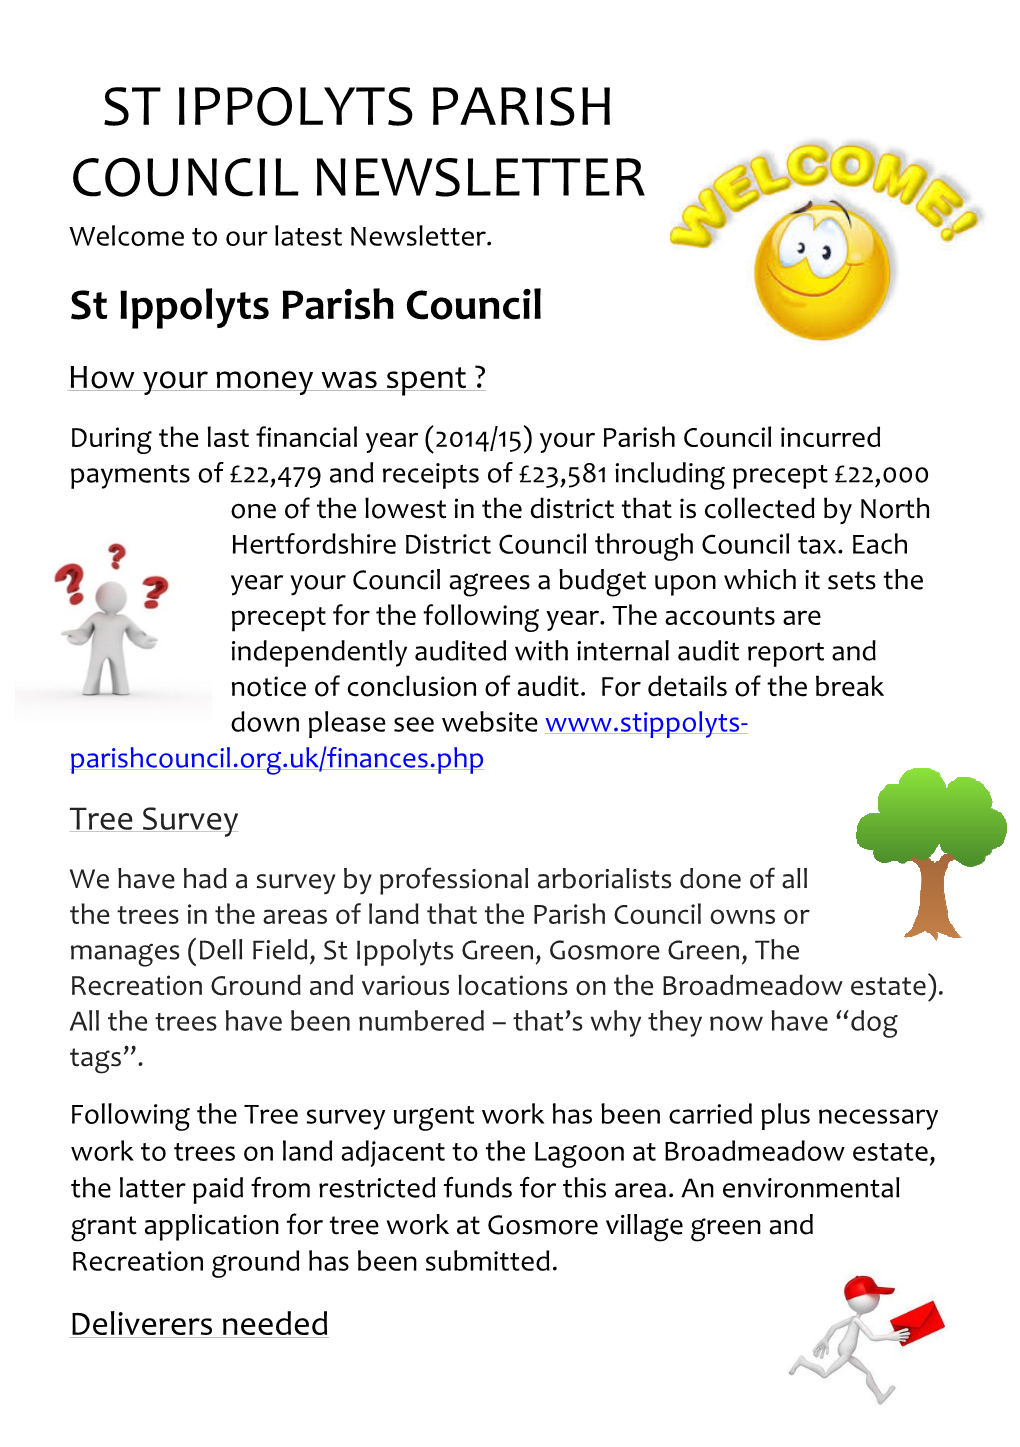 ST IPPOLYTS PARISH COUNCIL NEWSLETTER Welcome to Our Latest Newsletter